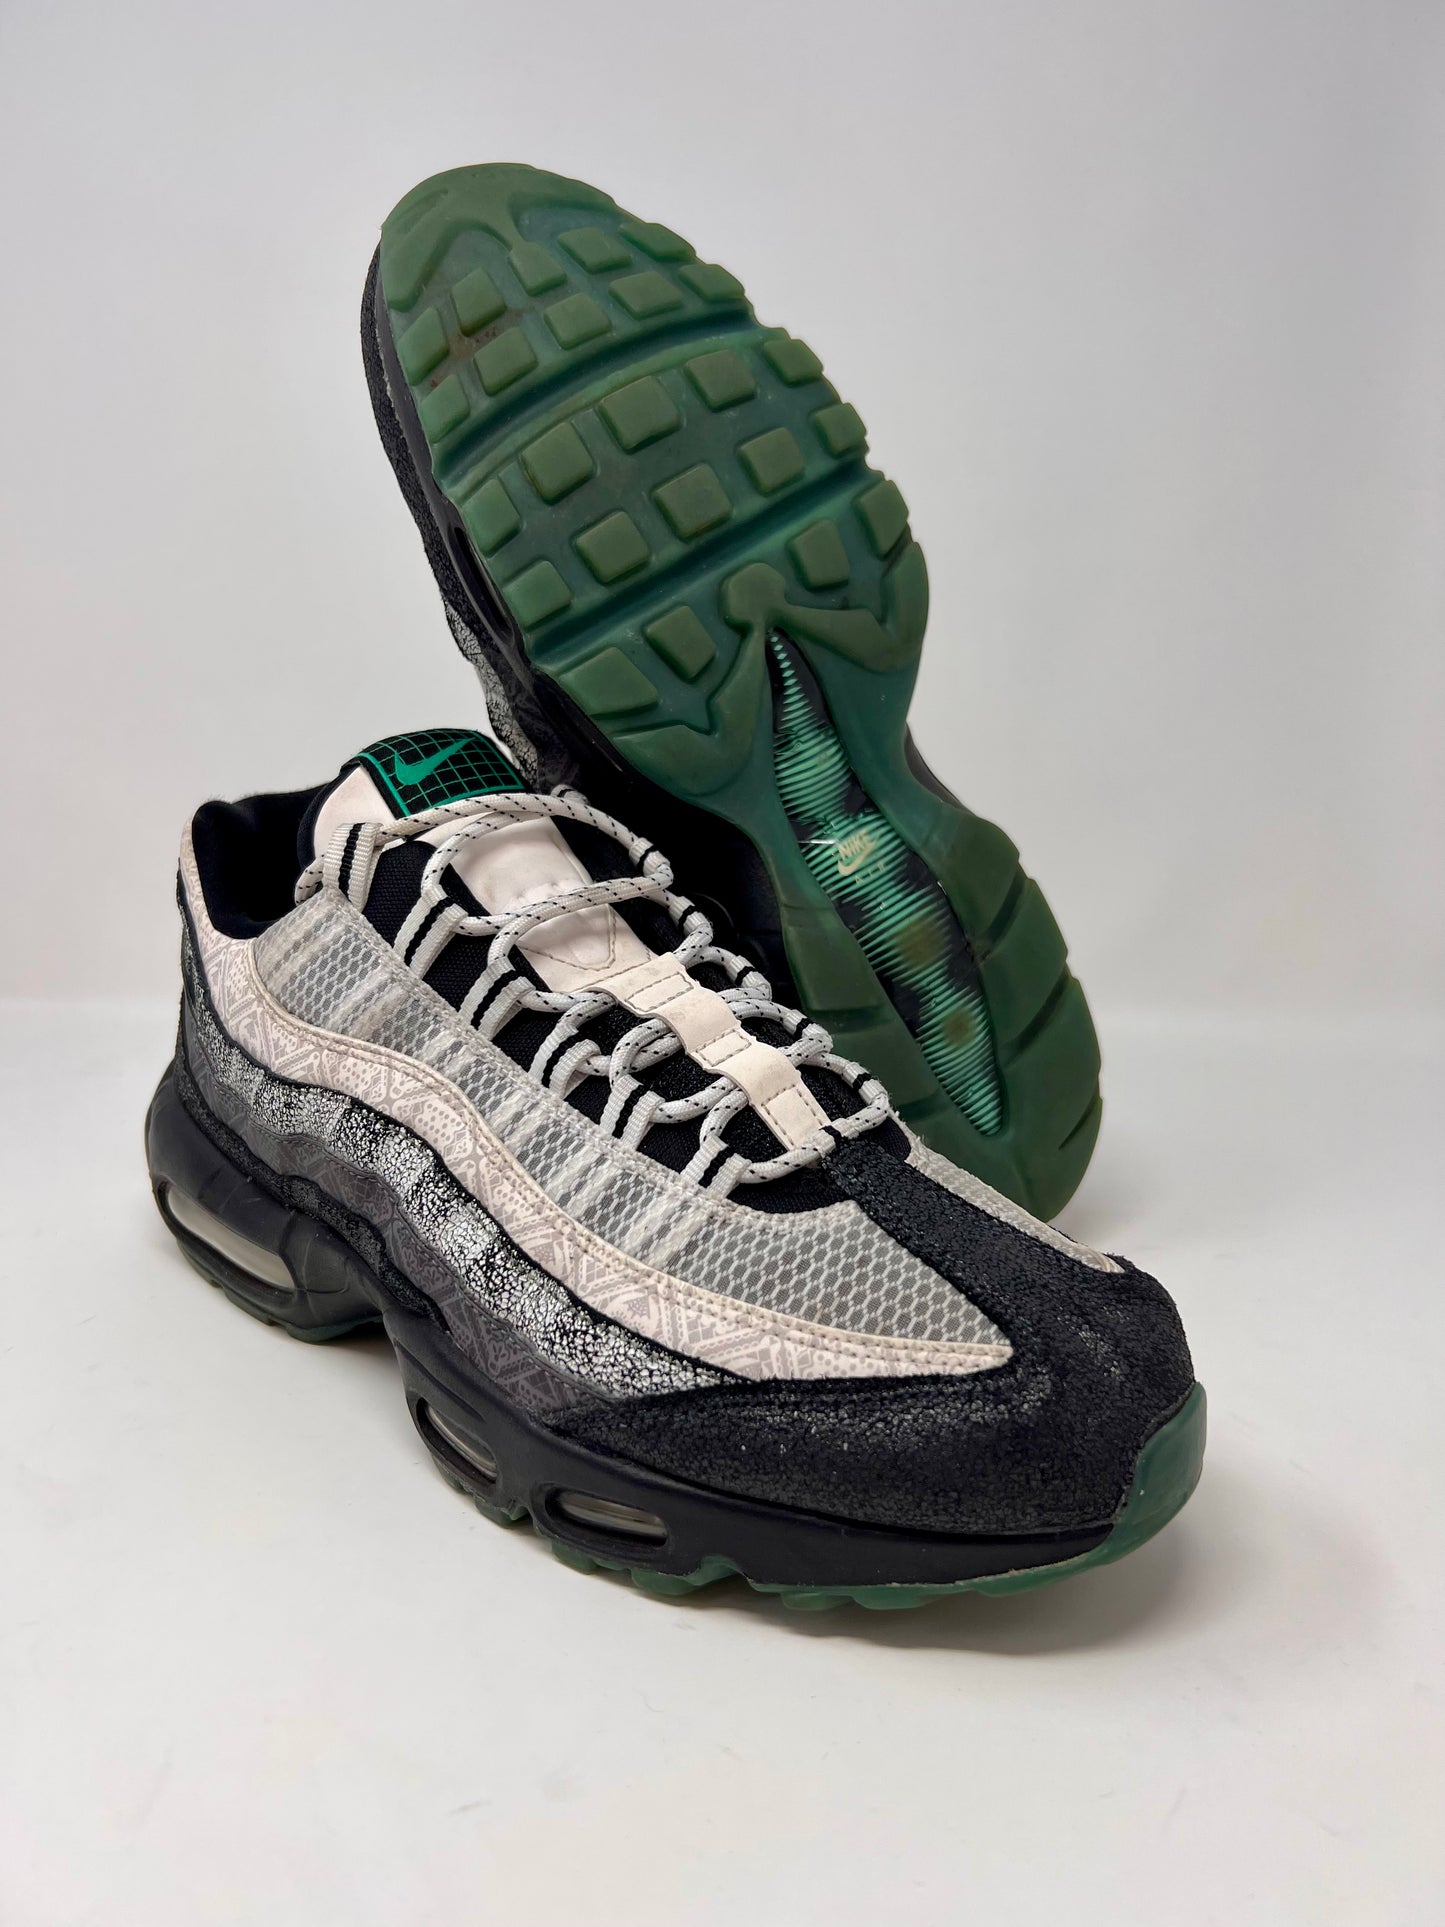 Nike Air Max 95 Day Of The Dead UK10.5